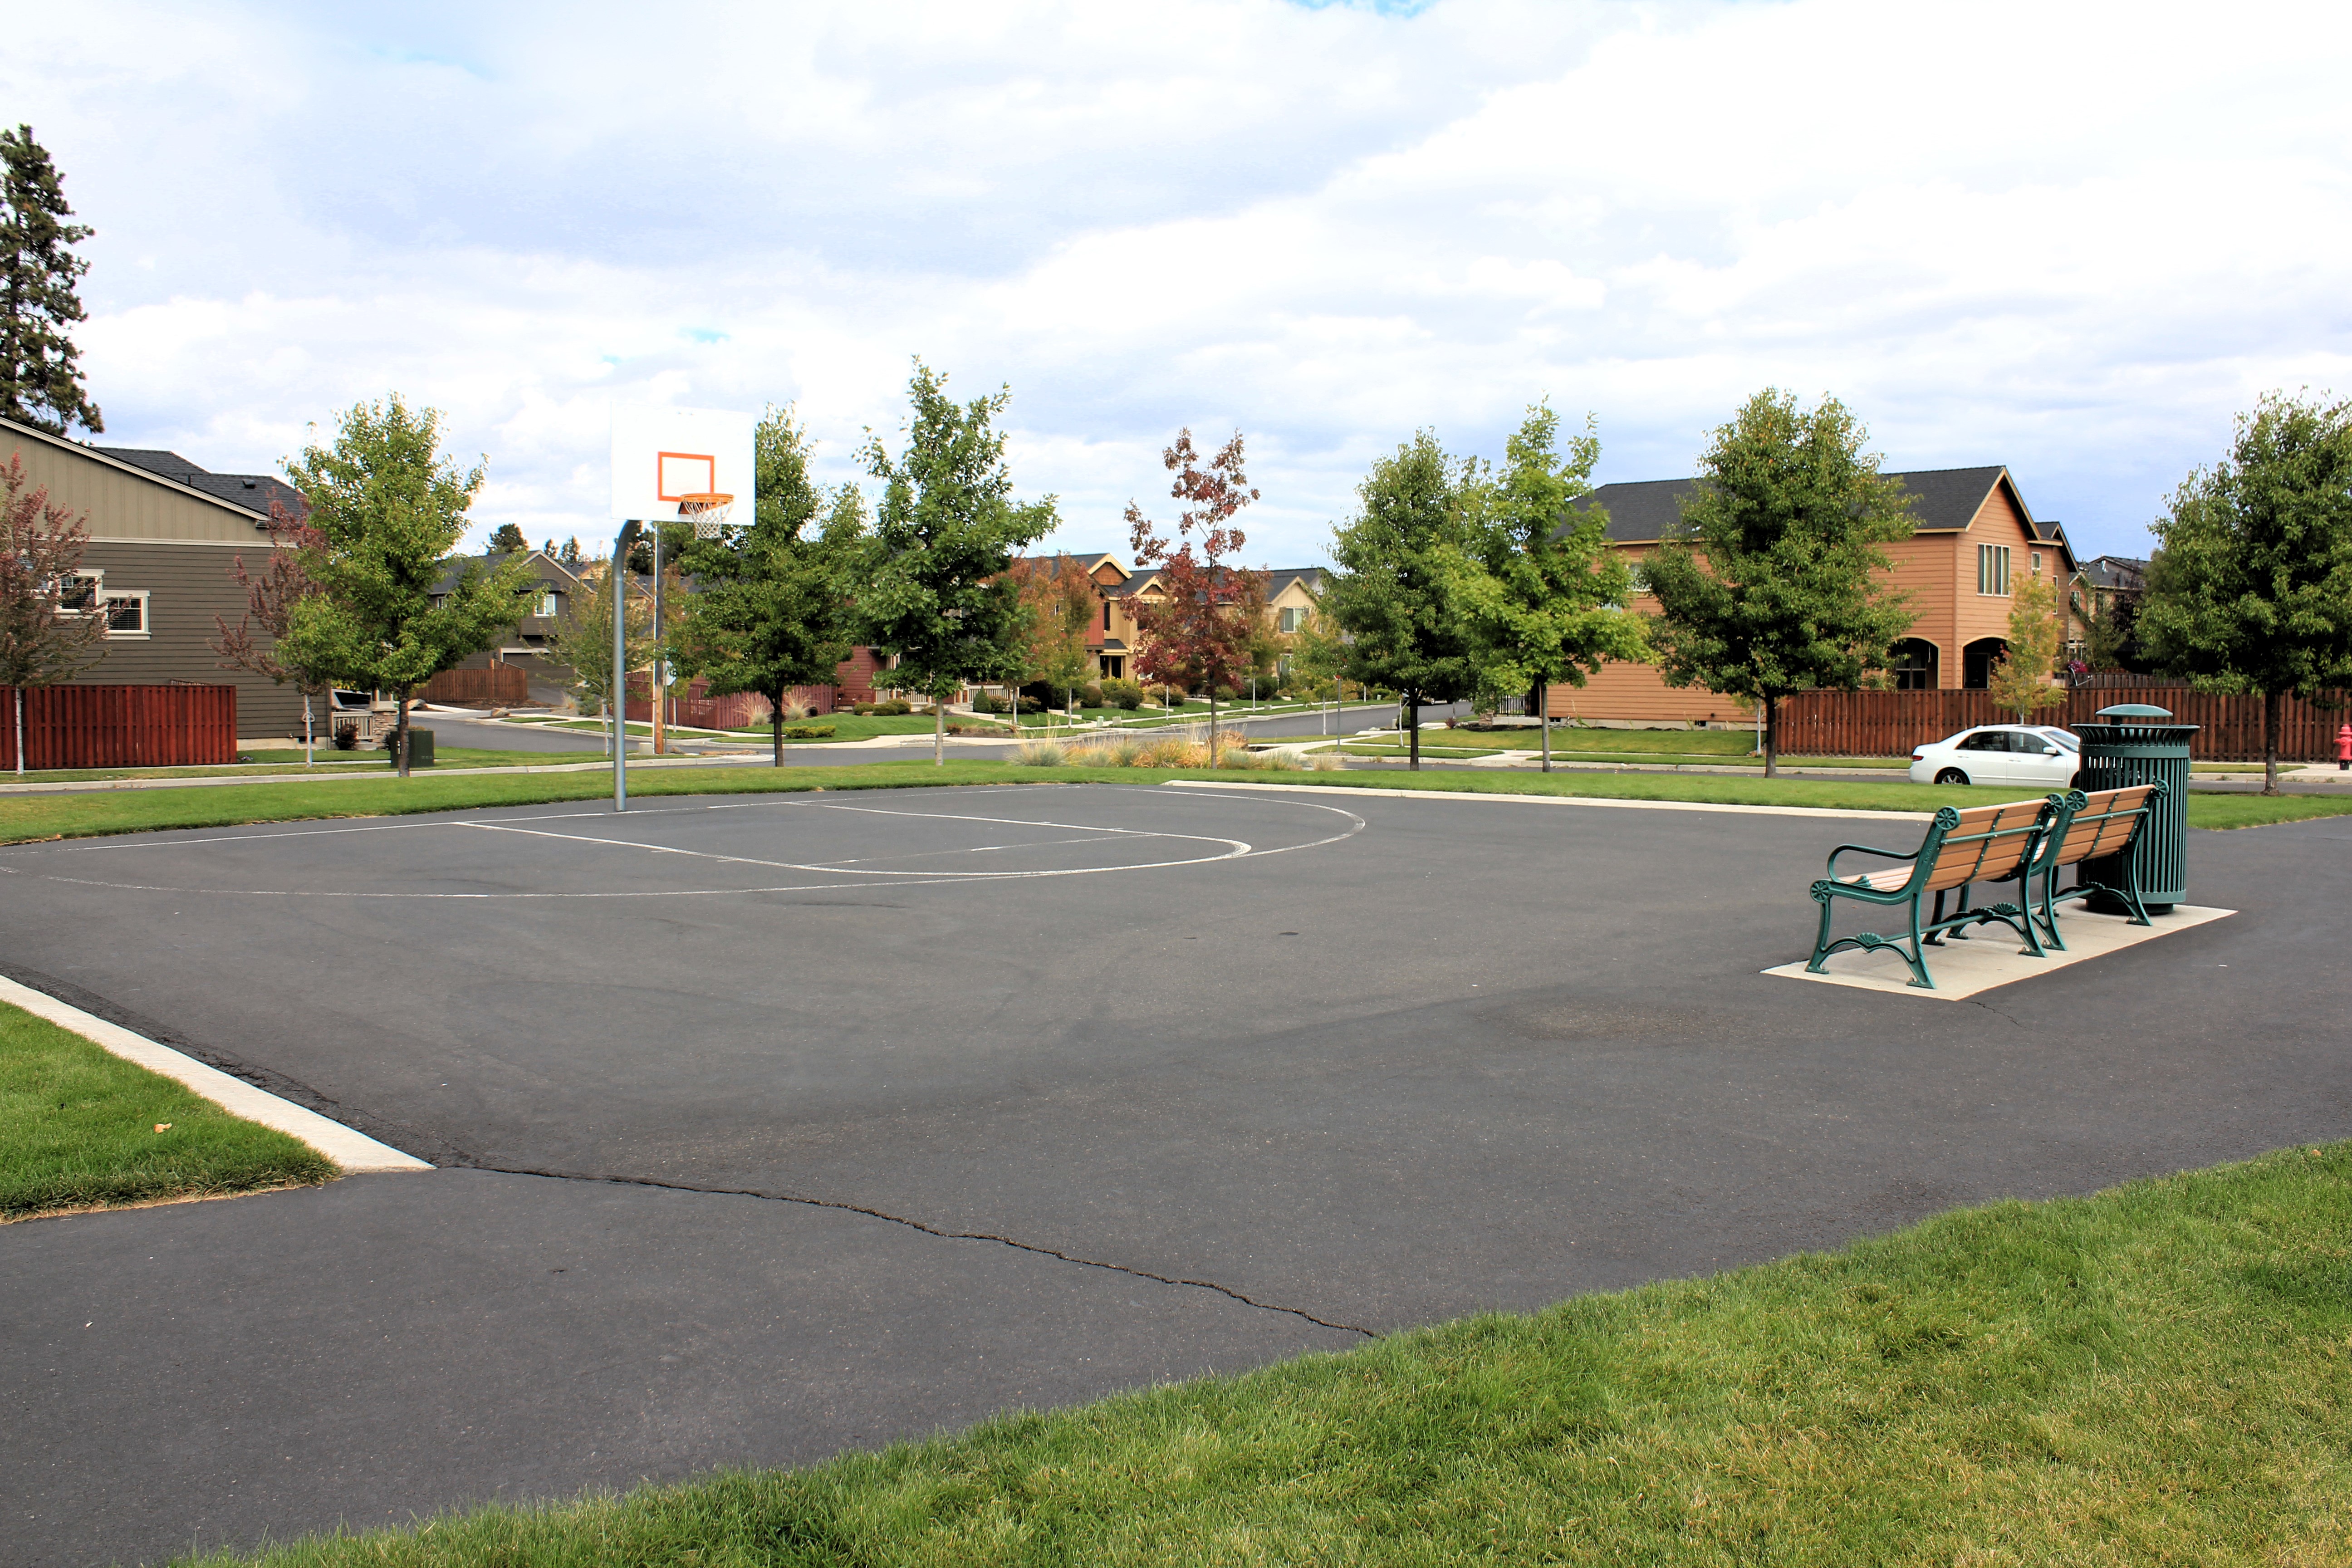 The basketball court at Sun Meadow Park